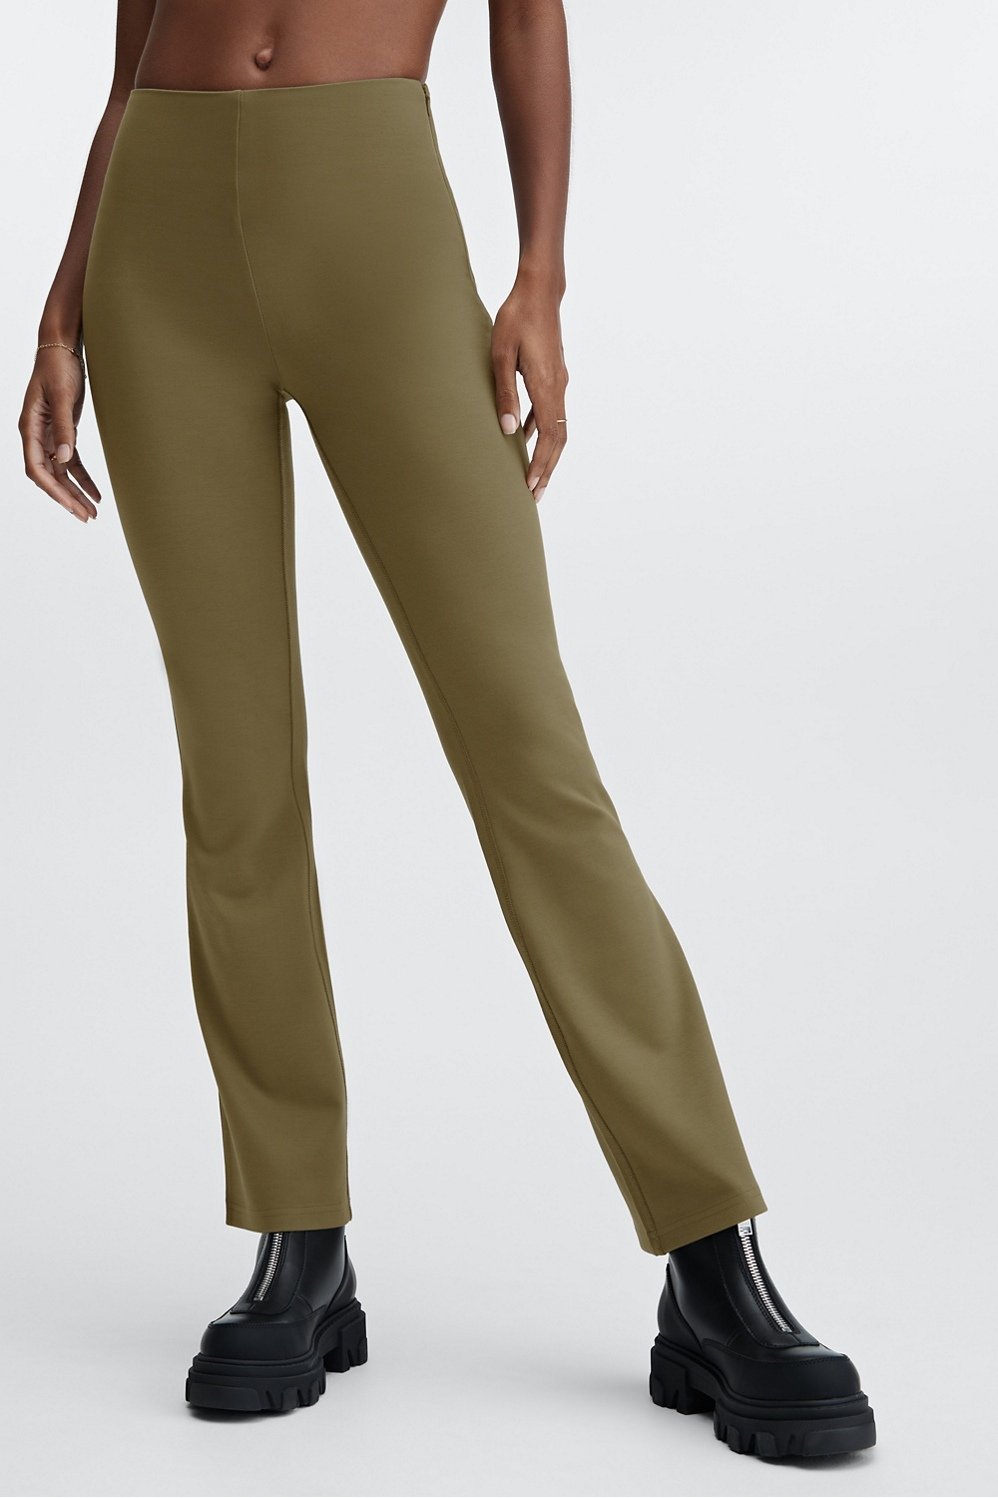 Fabletics Tall Girl Flare Pants